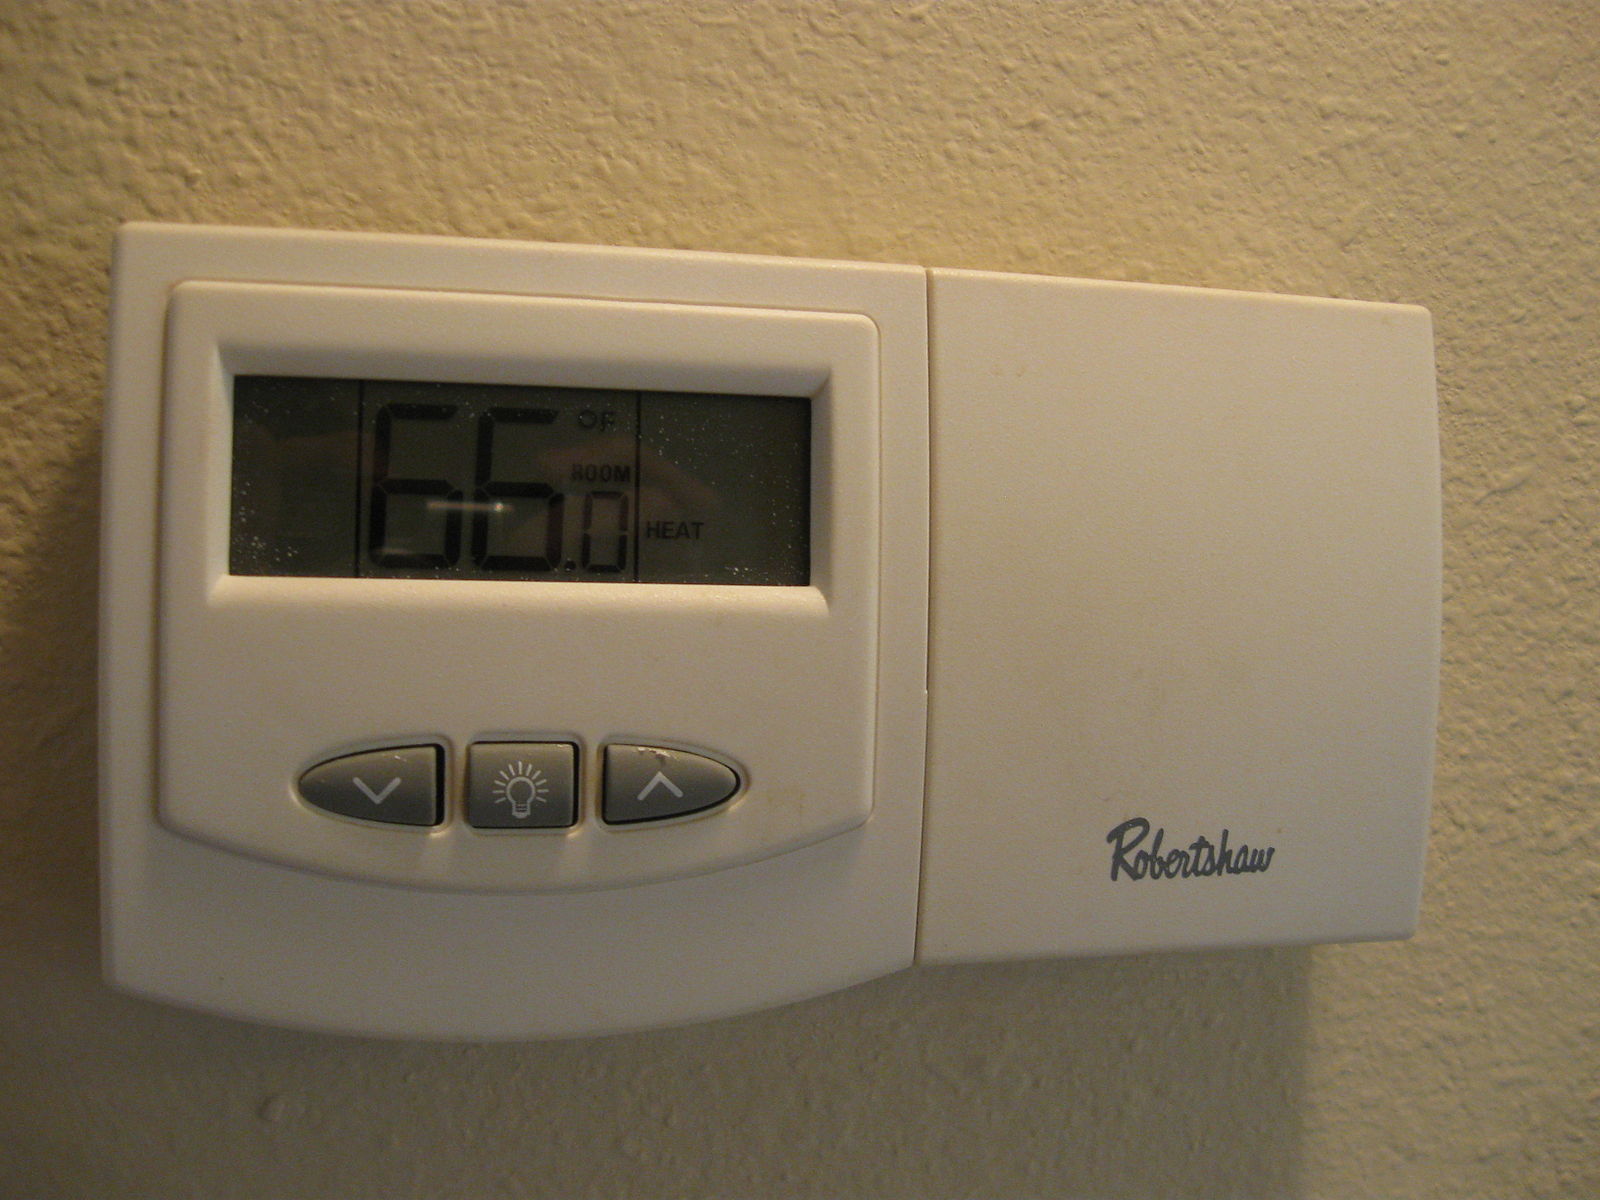 thermostat with remote sensor